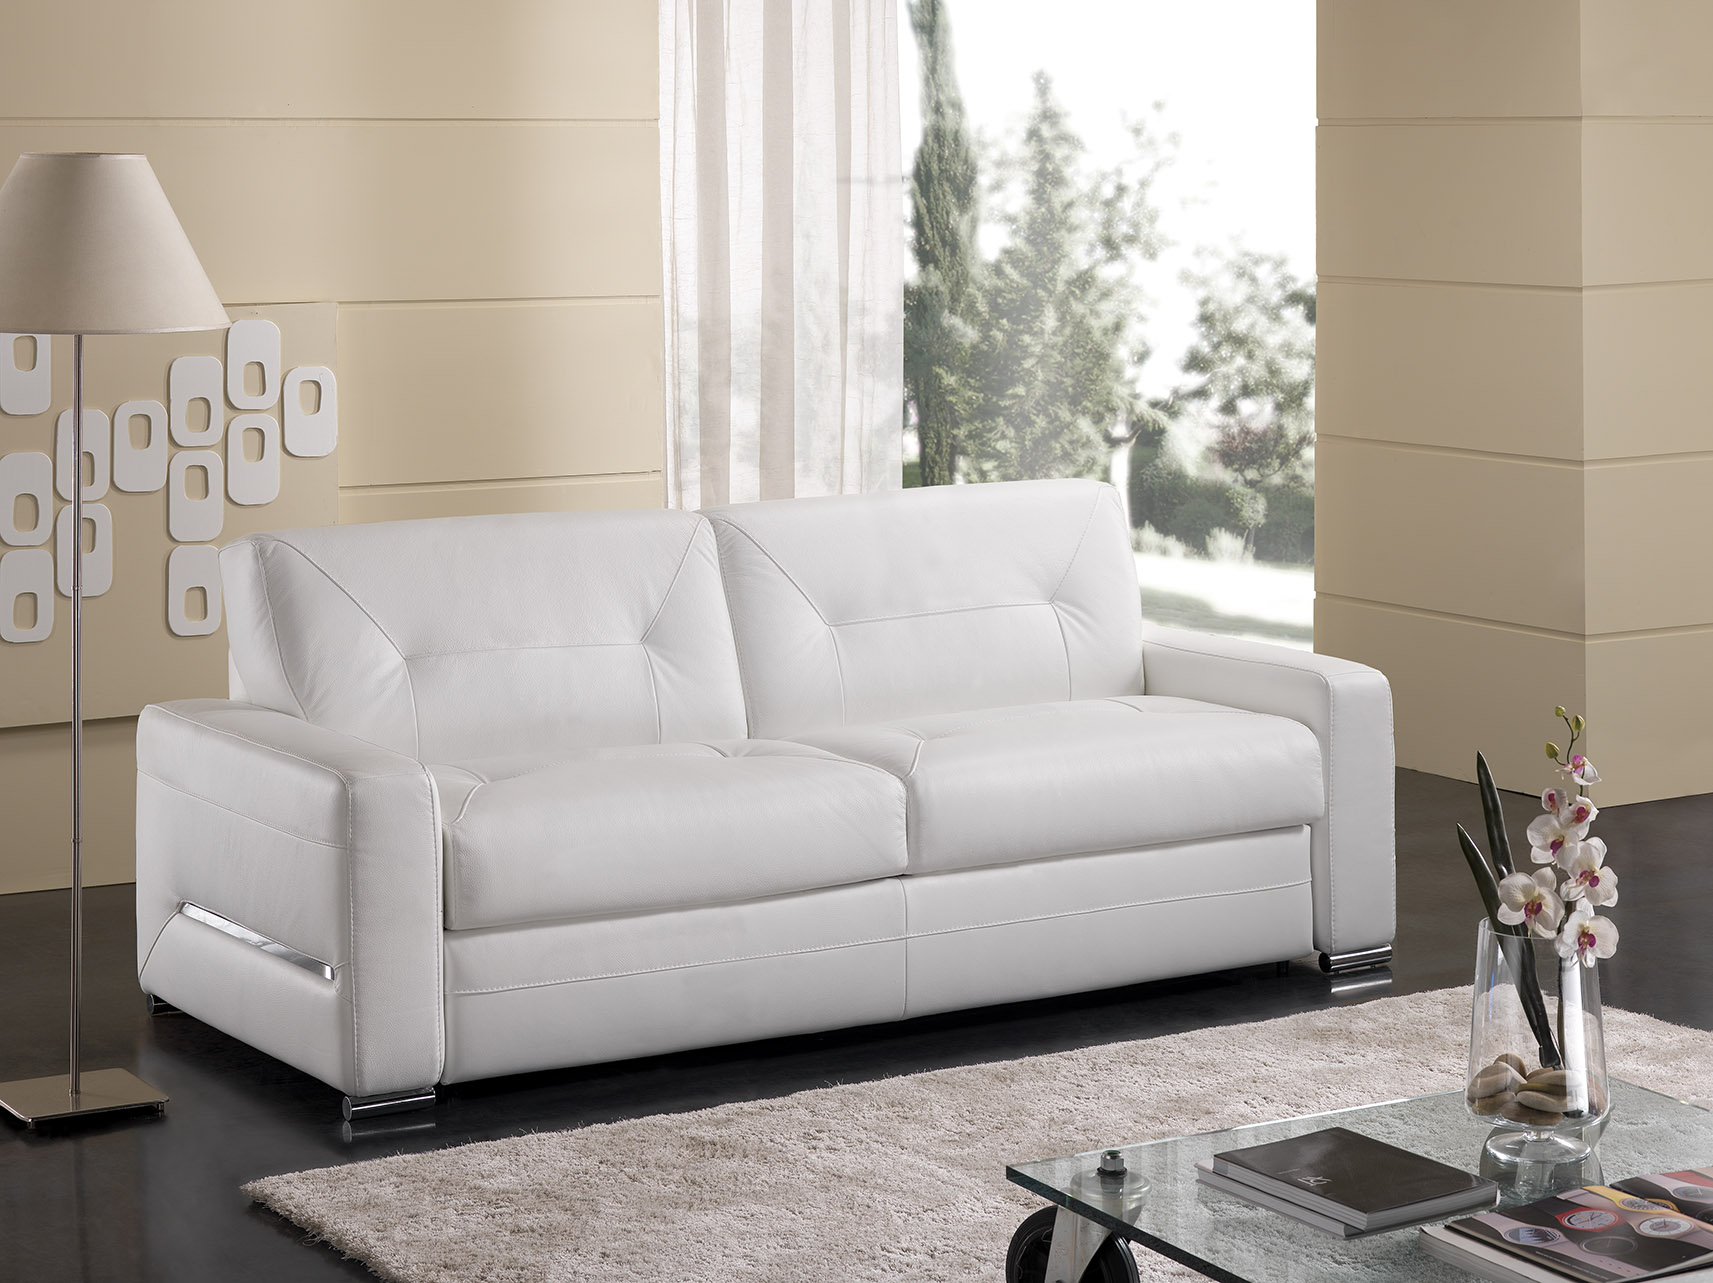 Brands SWH Classic Living Special Order Clio Sofa Bed